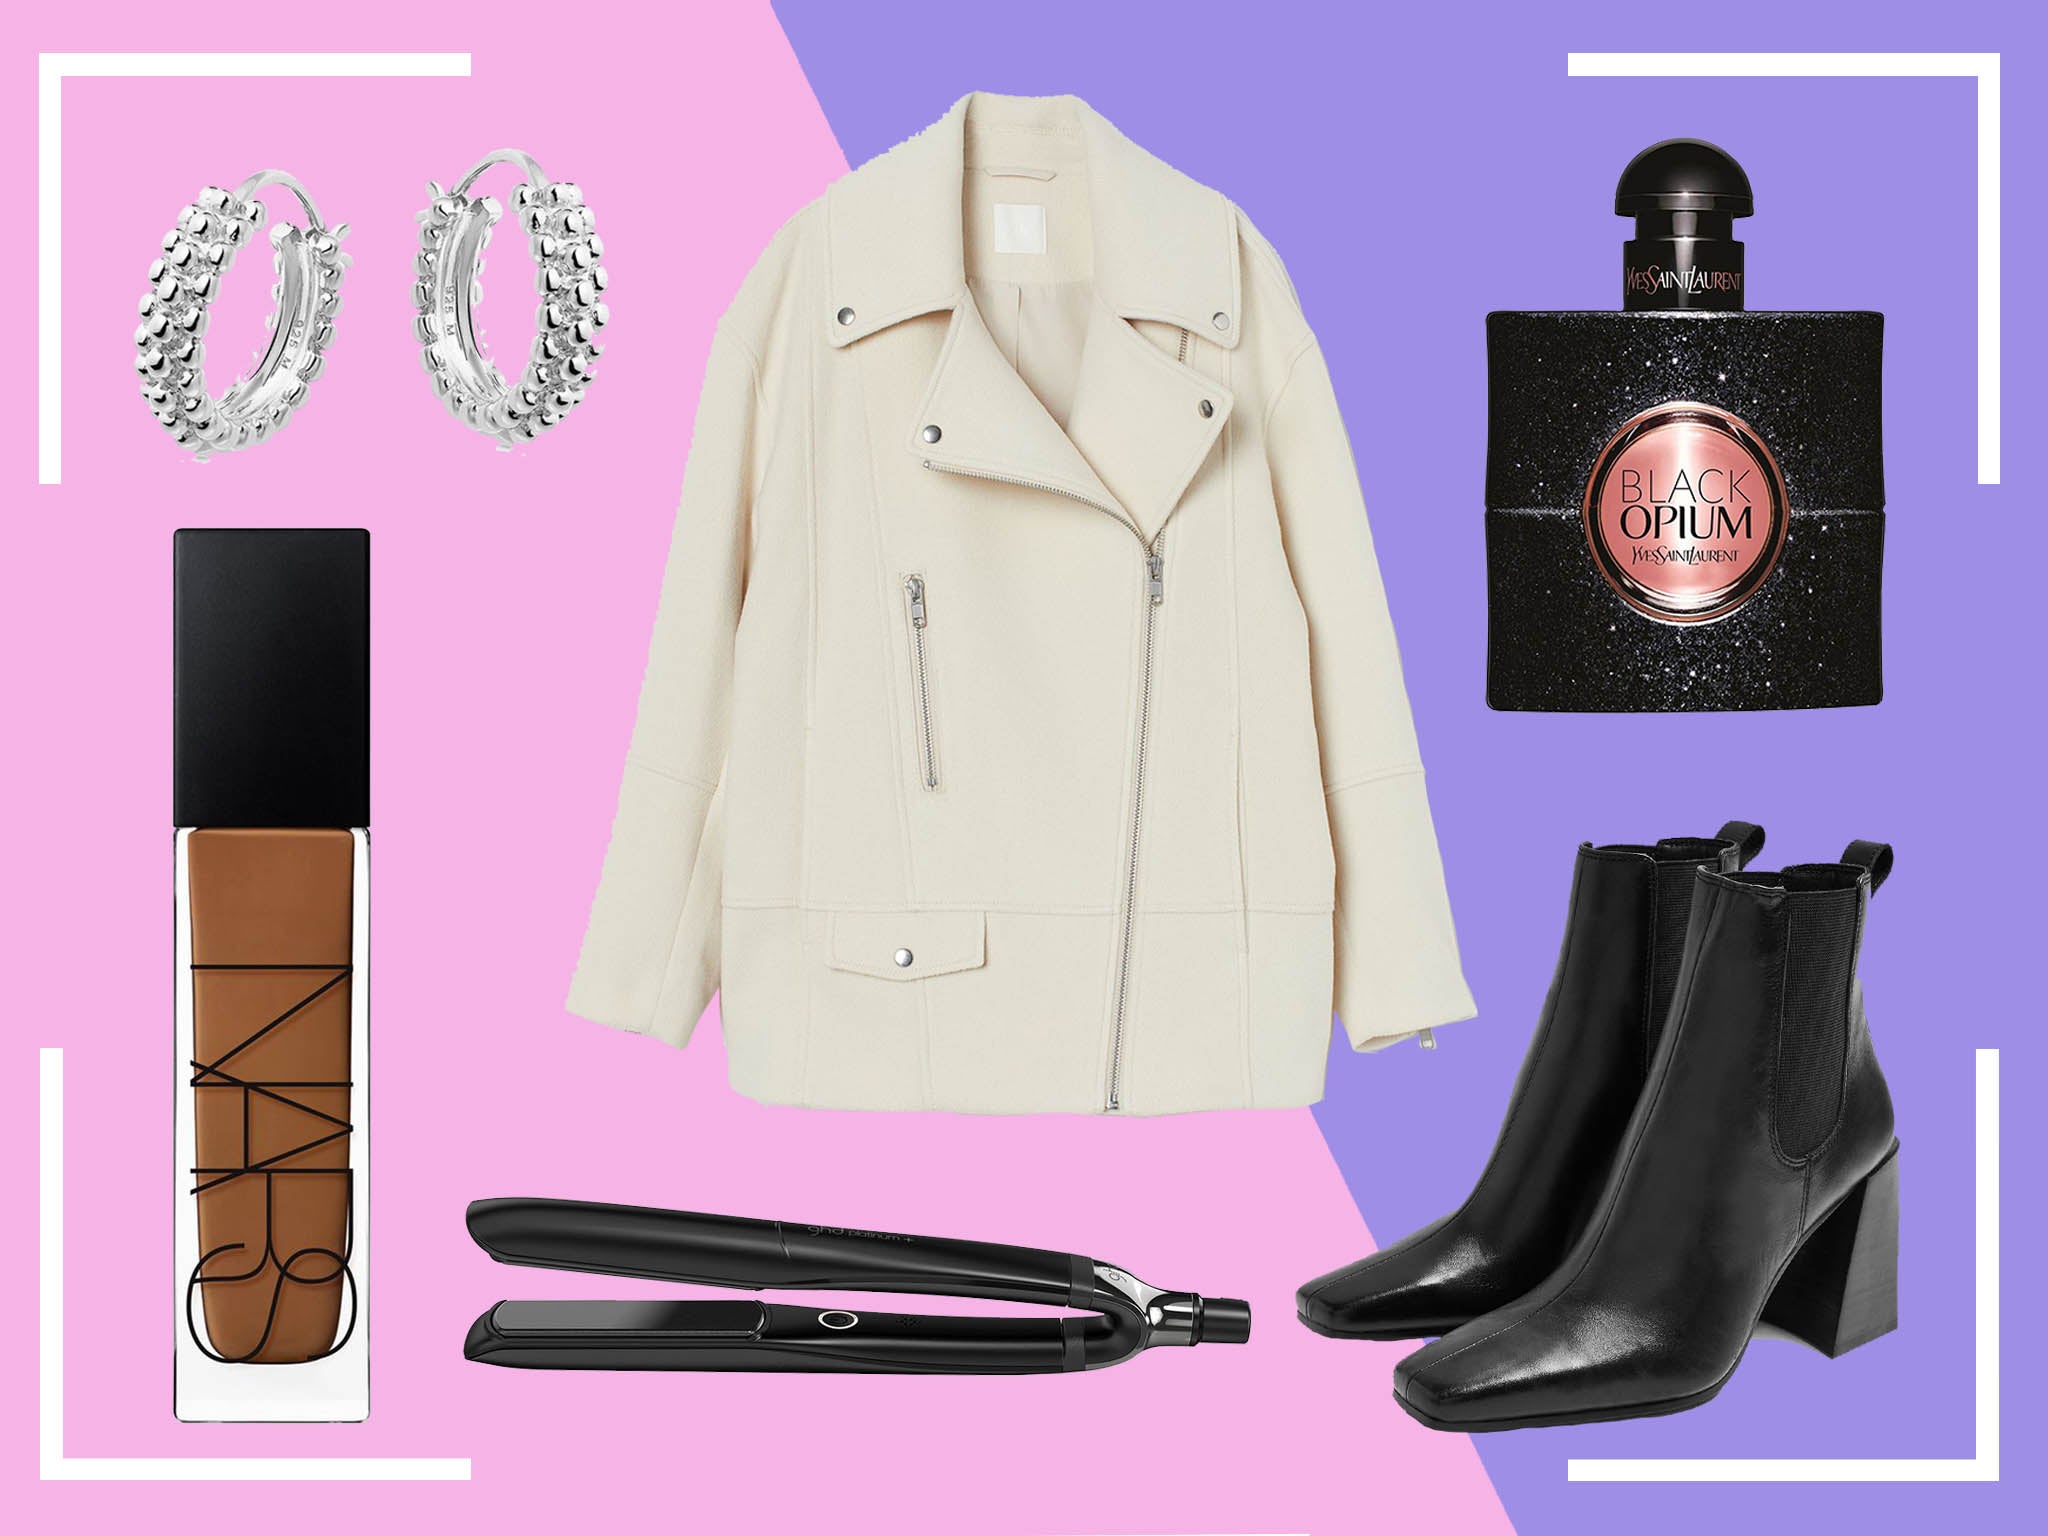 From Topshop to Cult Beauty, there are plenty of impressive savings to be had